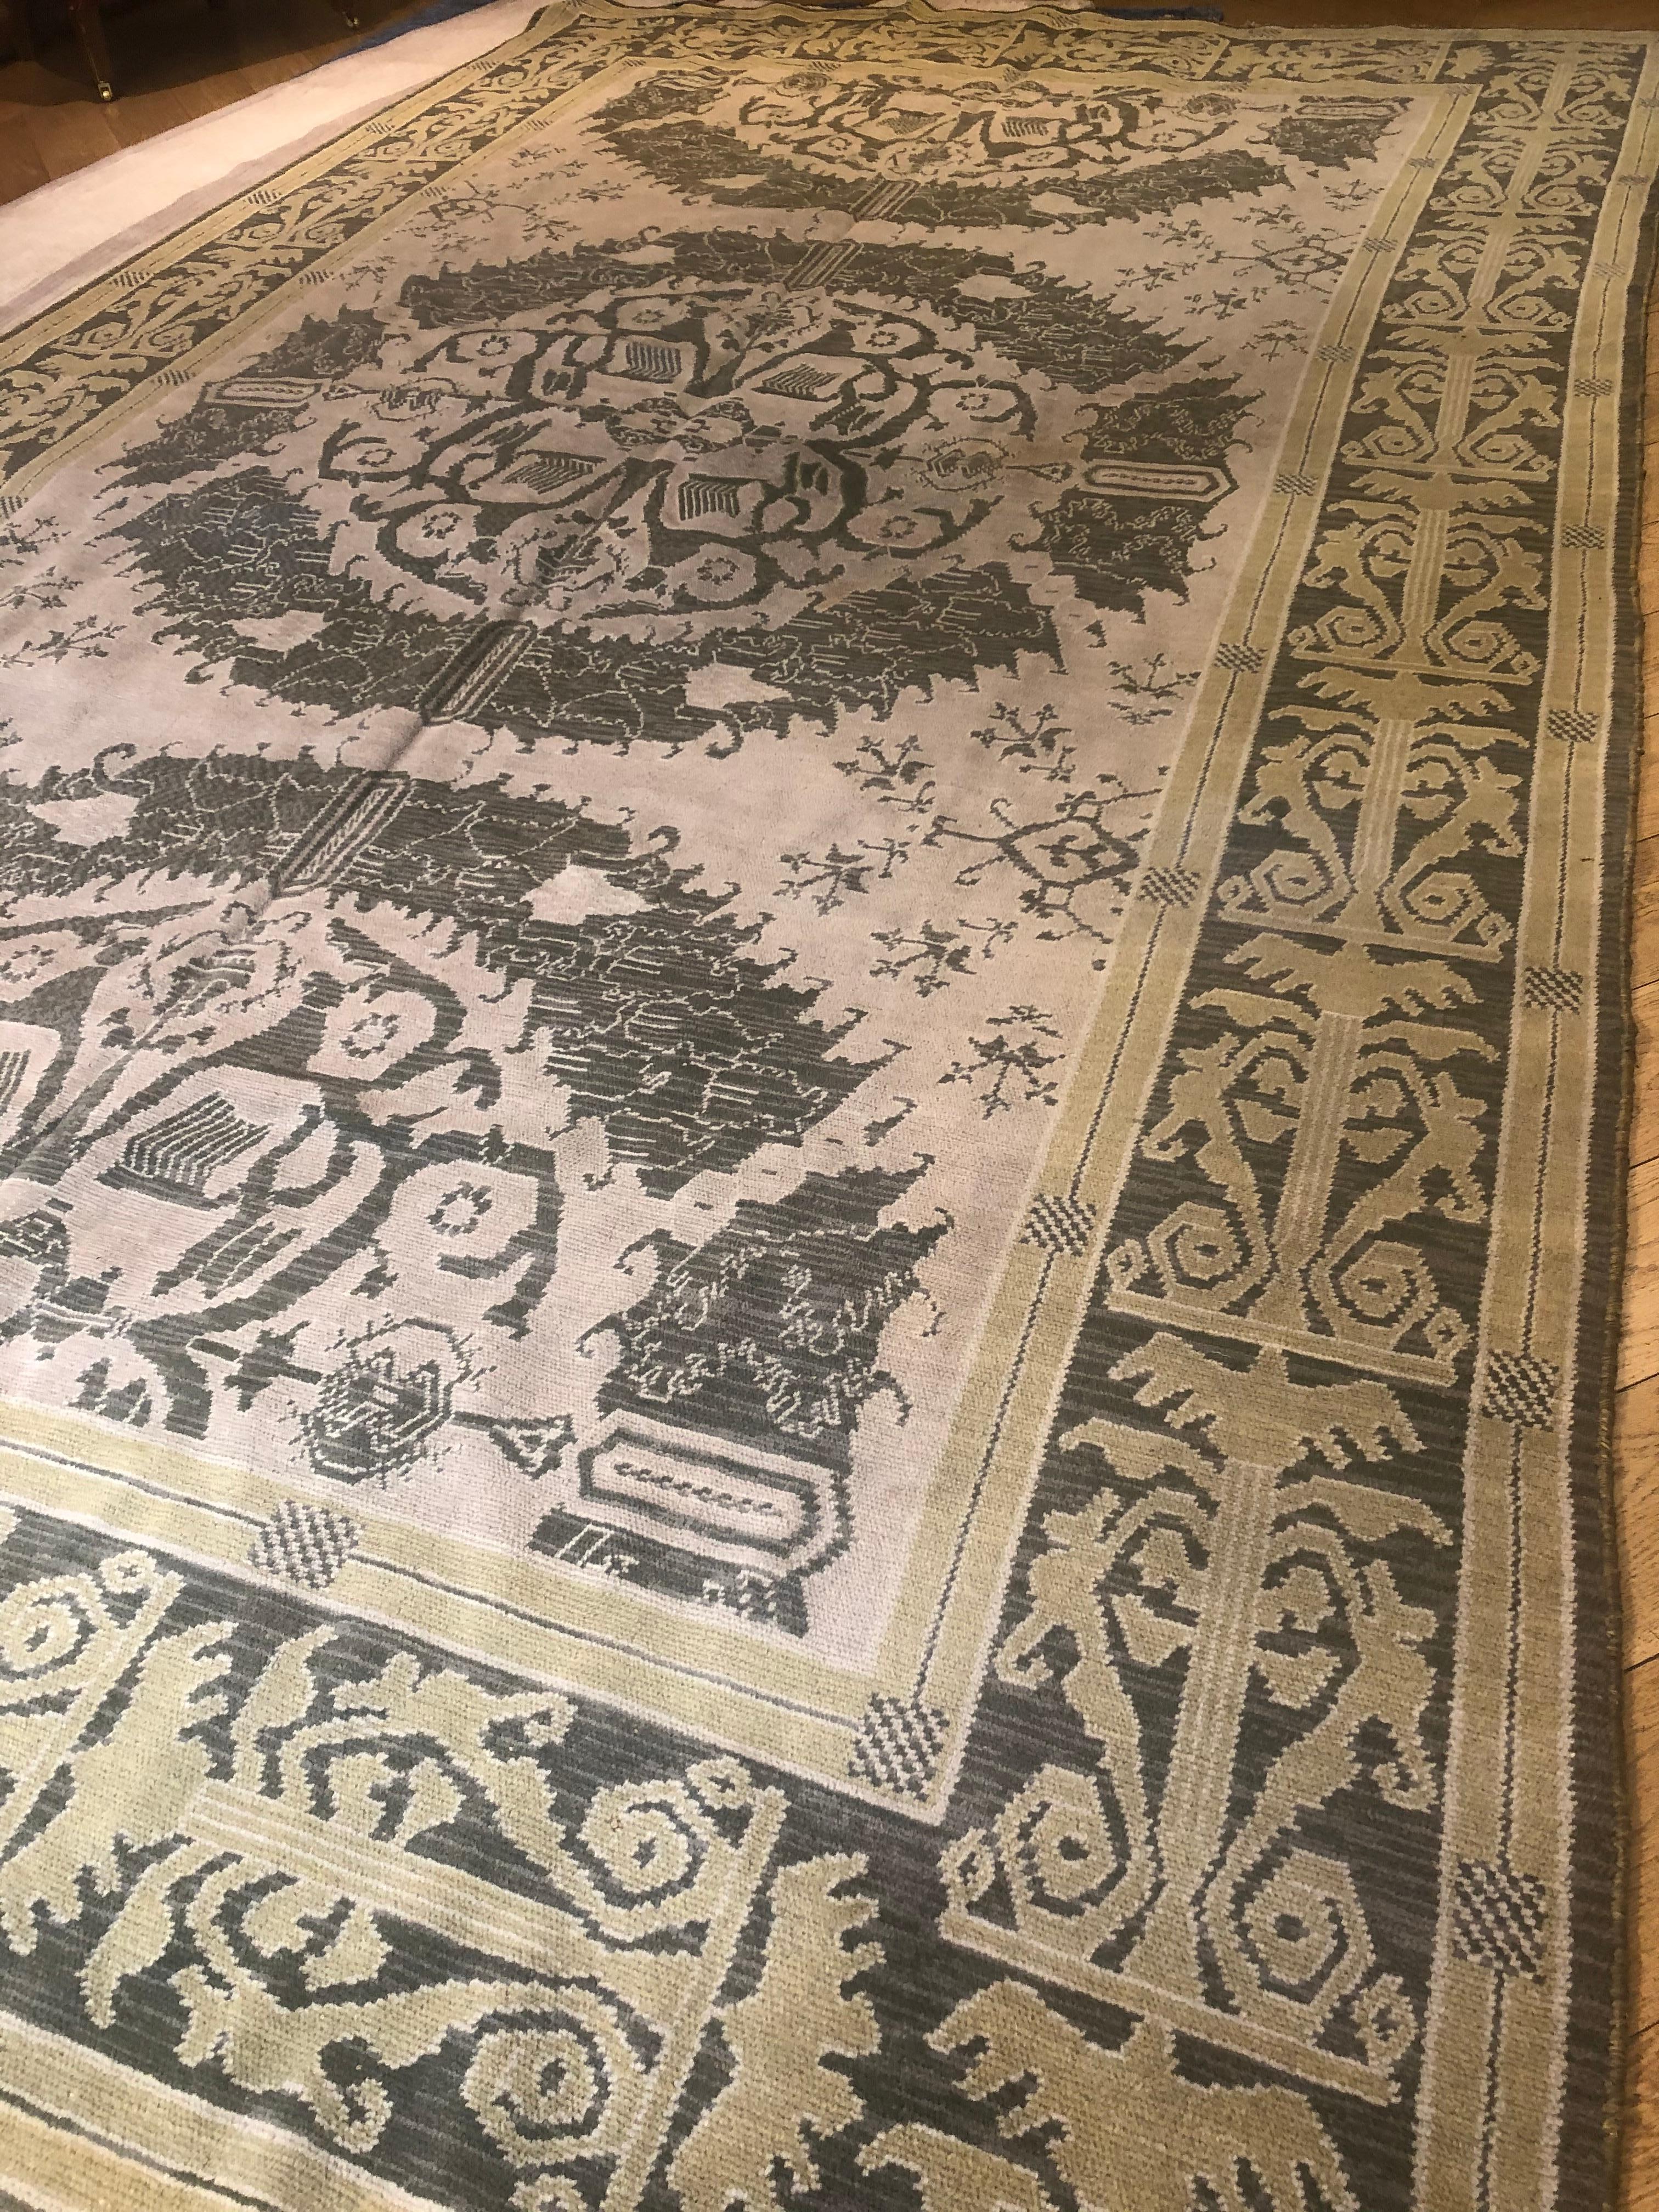 Hand-Knotted XXth Century Green White Cream Full Field Floral Motif Spain Rug, ca 1920